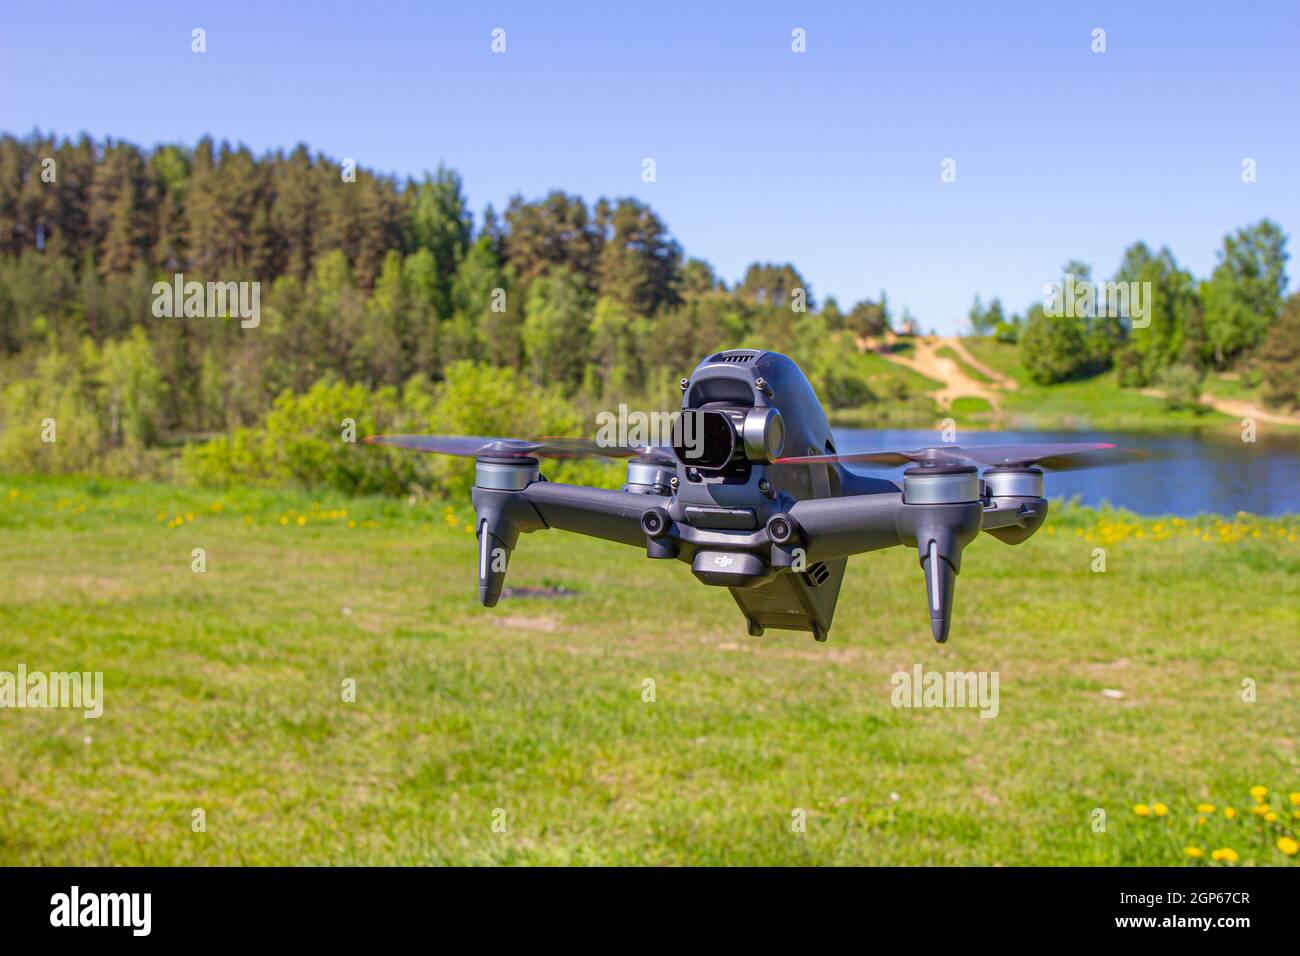 Moscow, 31 MAY 2021 : A new DJI FPV drone is flying during a sunny day on grass in beckground. Top Front View. Headless Quadcopter with Digital 4K 60 Stock Photo